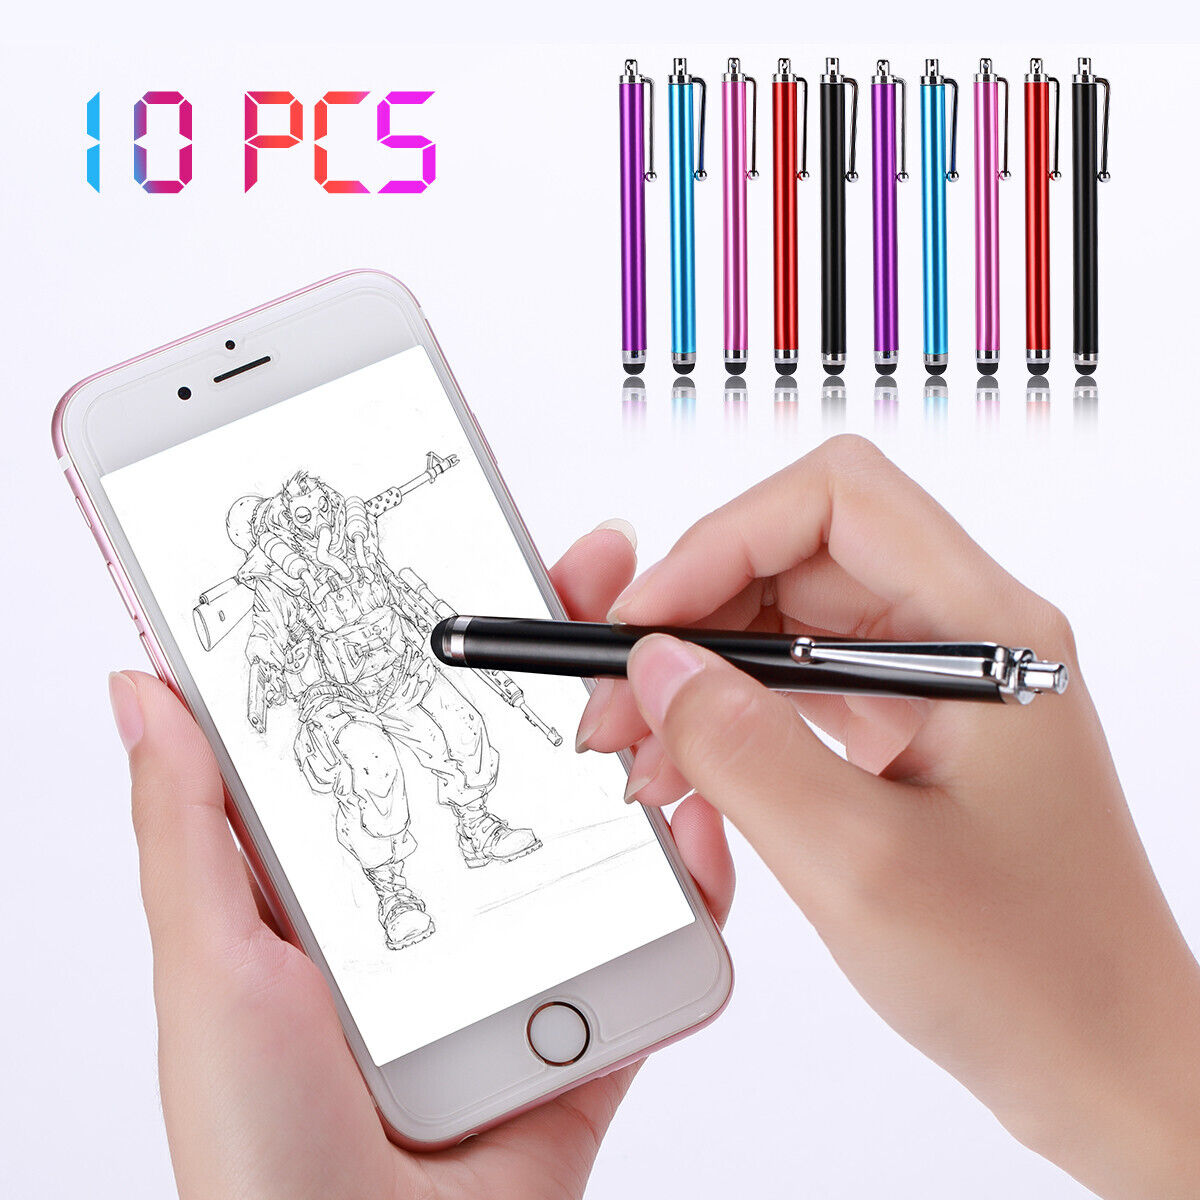 10 Capacitive Touch Screen Stylus Pen Universal For iPhone iPad Samsung Tablet Ombar Universal Touch Screen Stylus/Pen - фотография #3